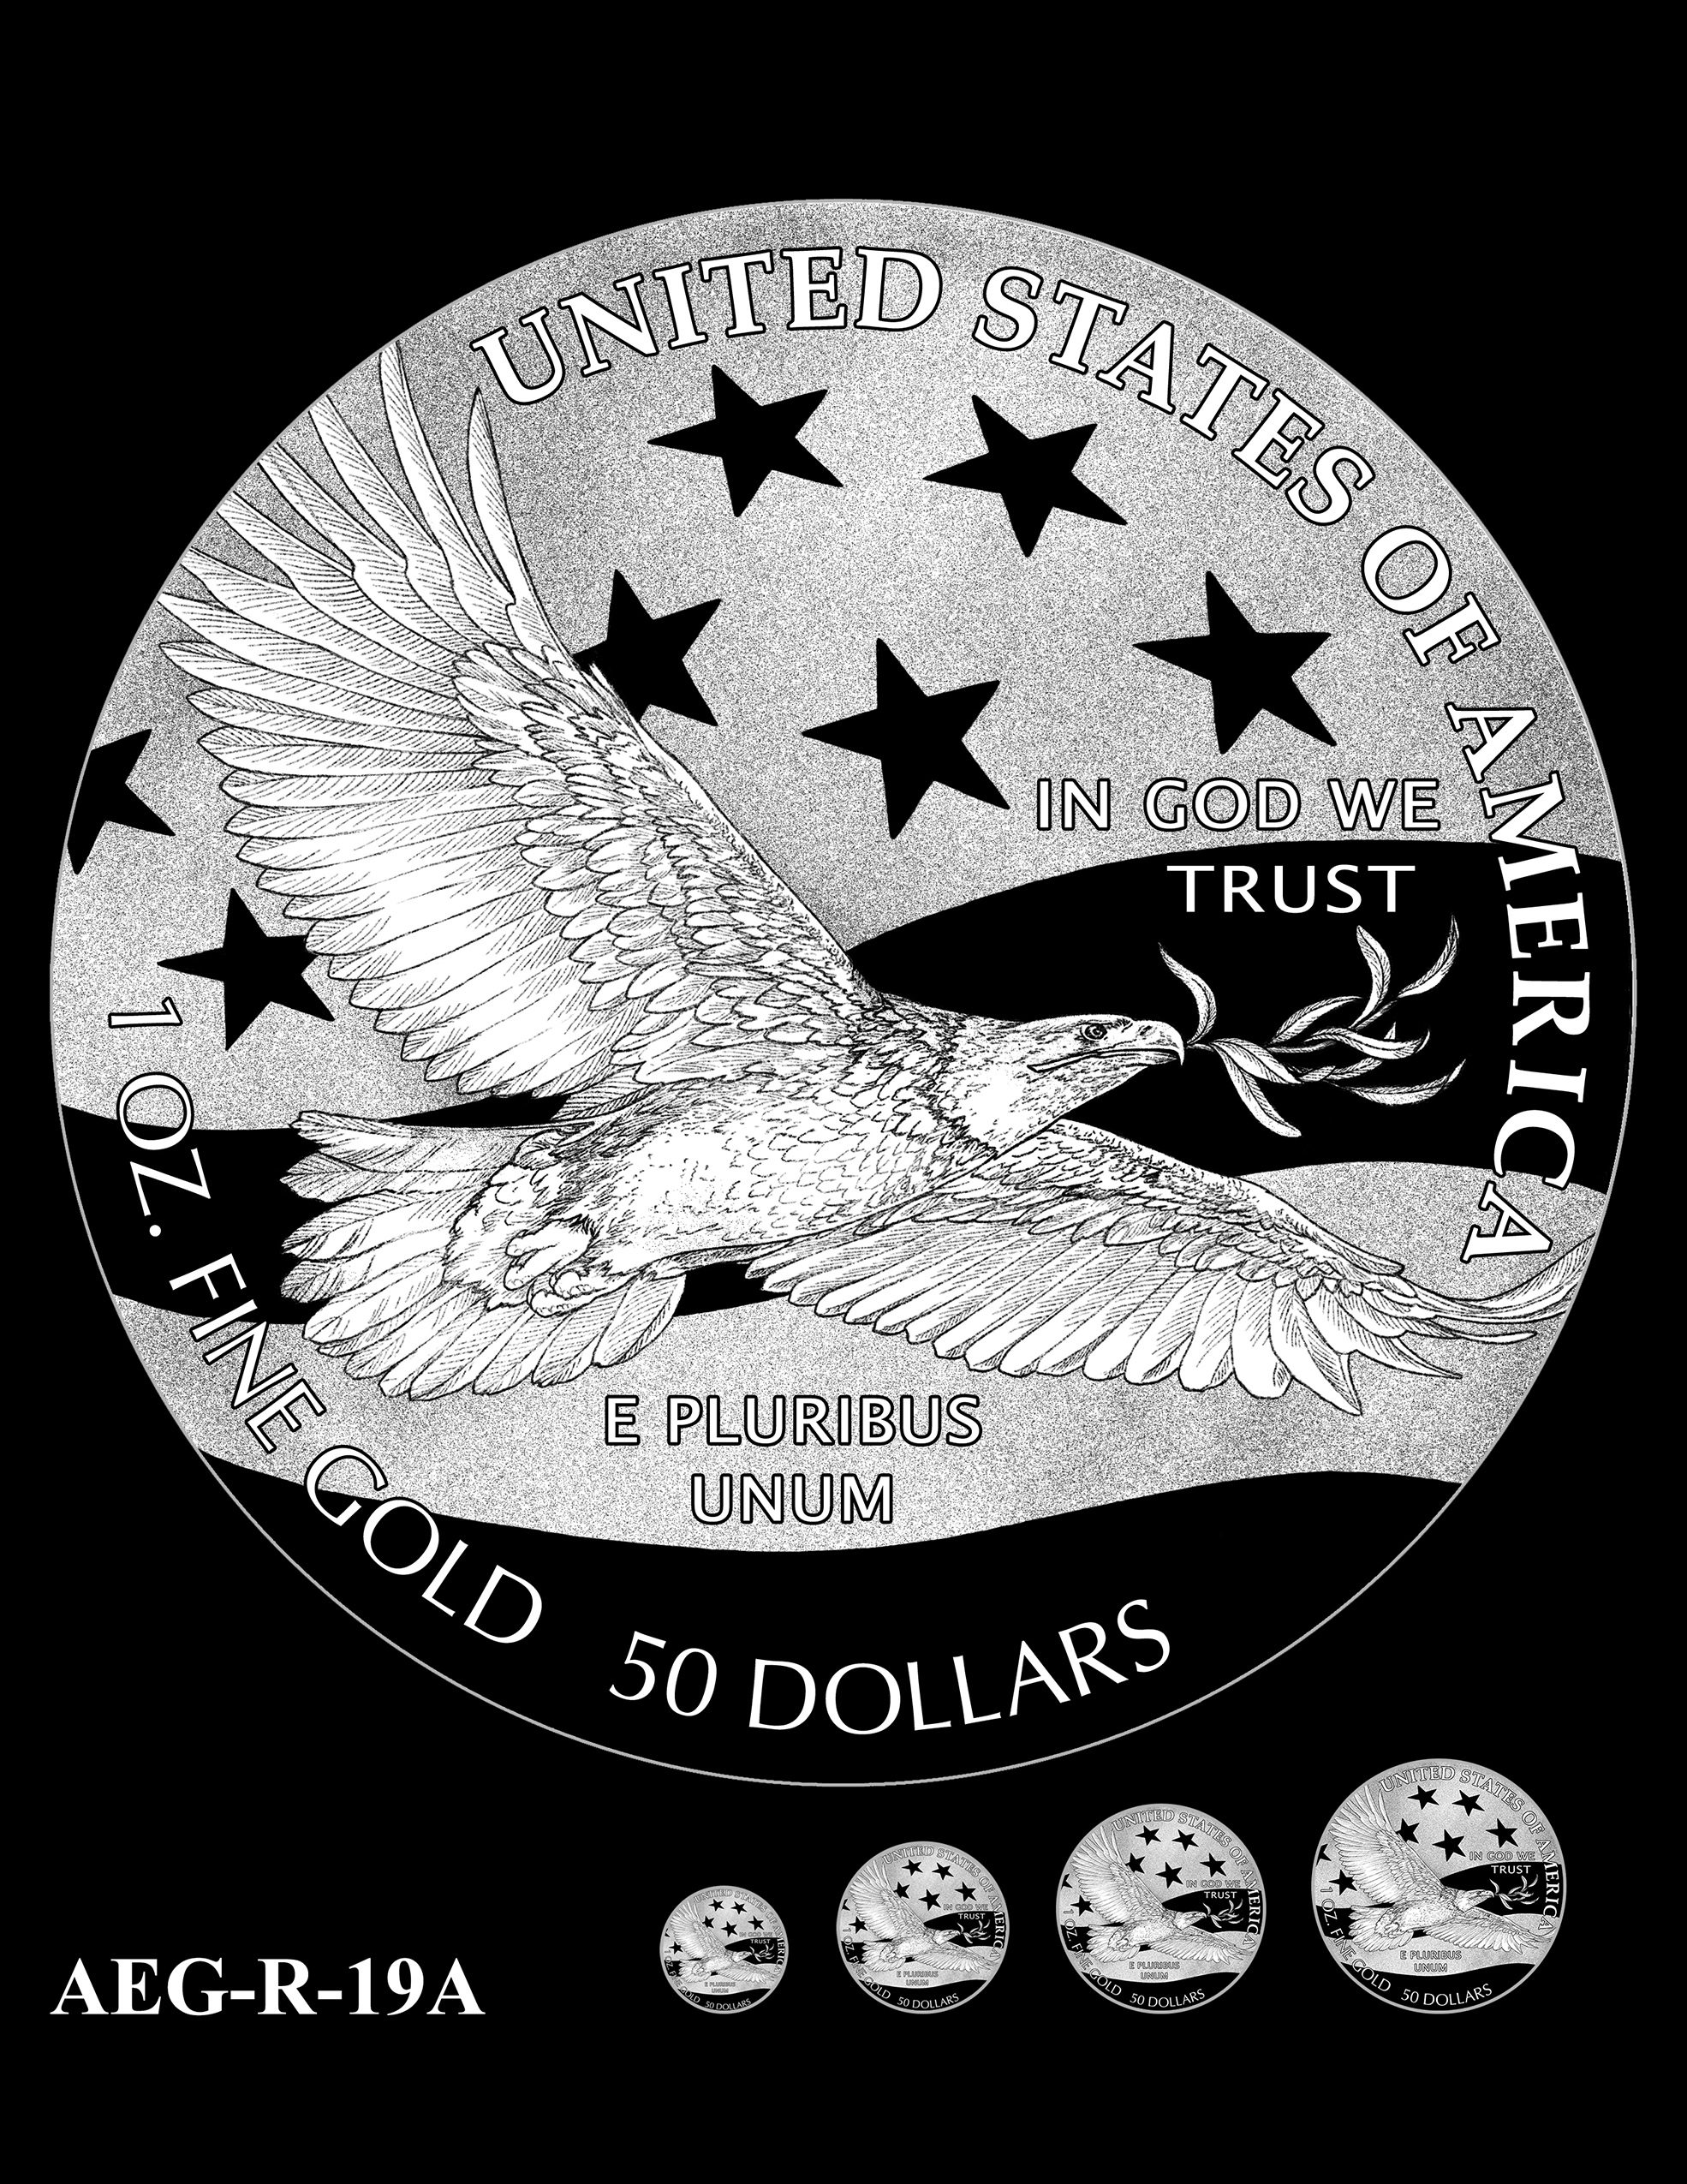 AEG-R-19A -- American Eagle Proof and Bullion Gold Coin - Reverse